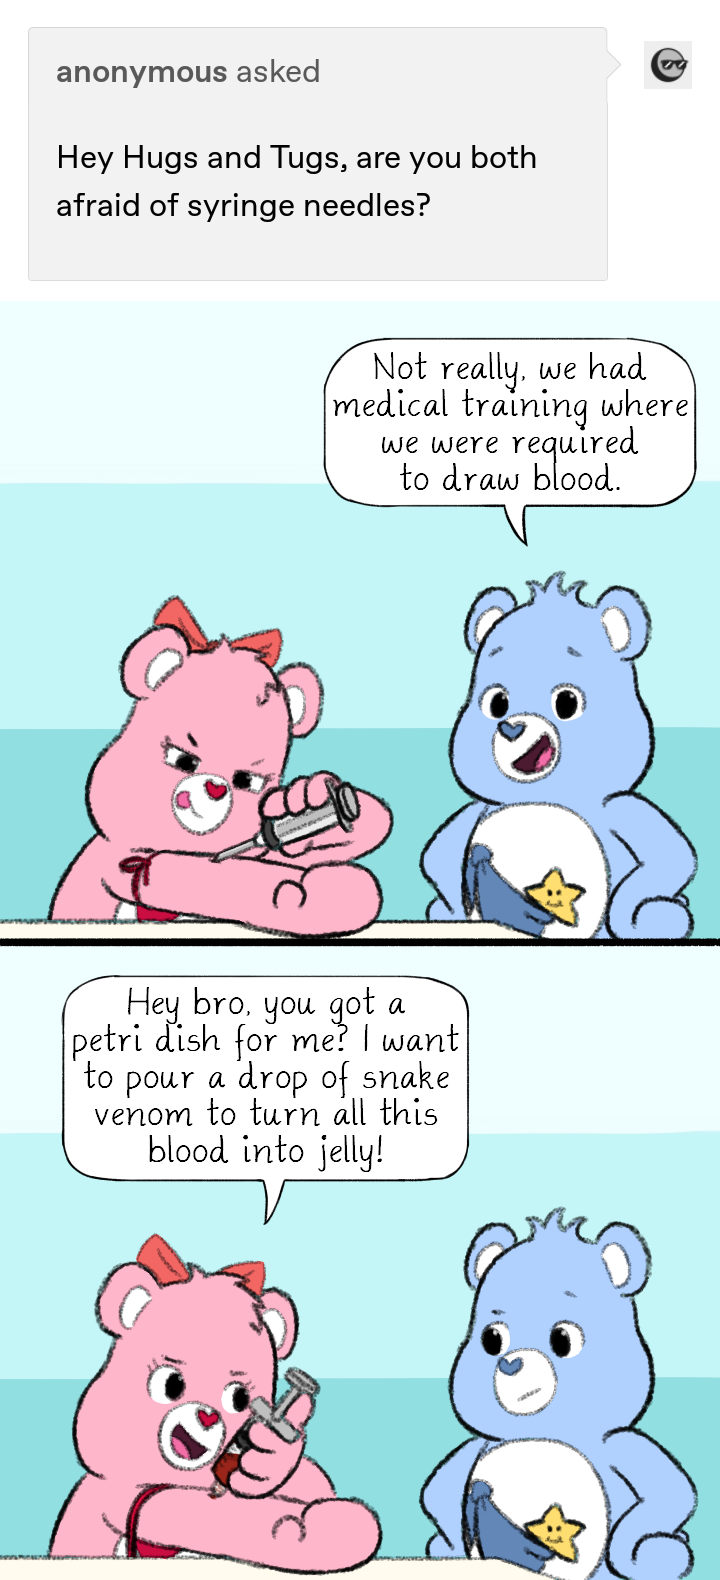 Ask Cheer Bear — This pretty much summarizes the art dude's first